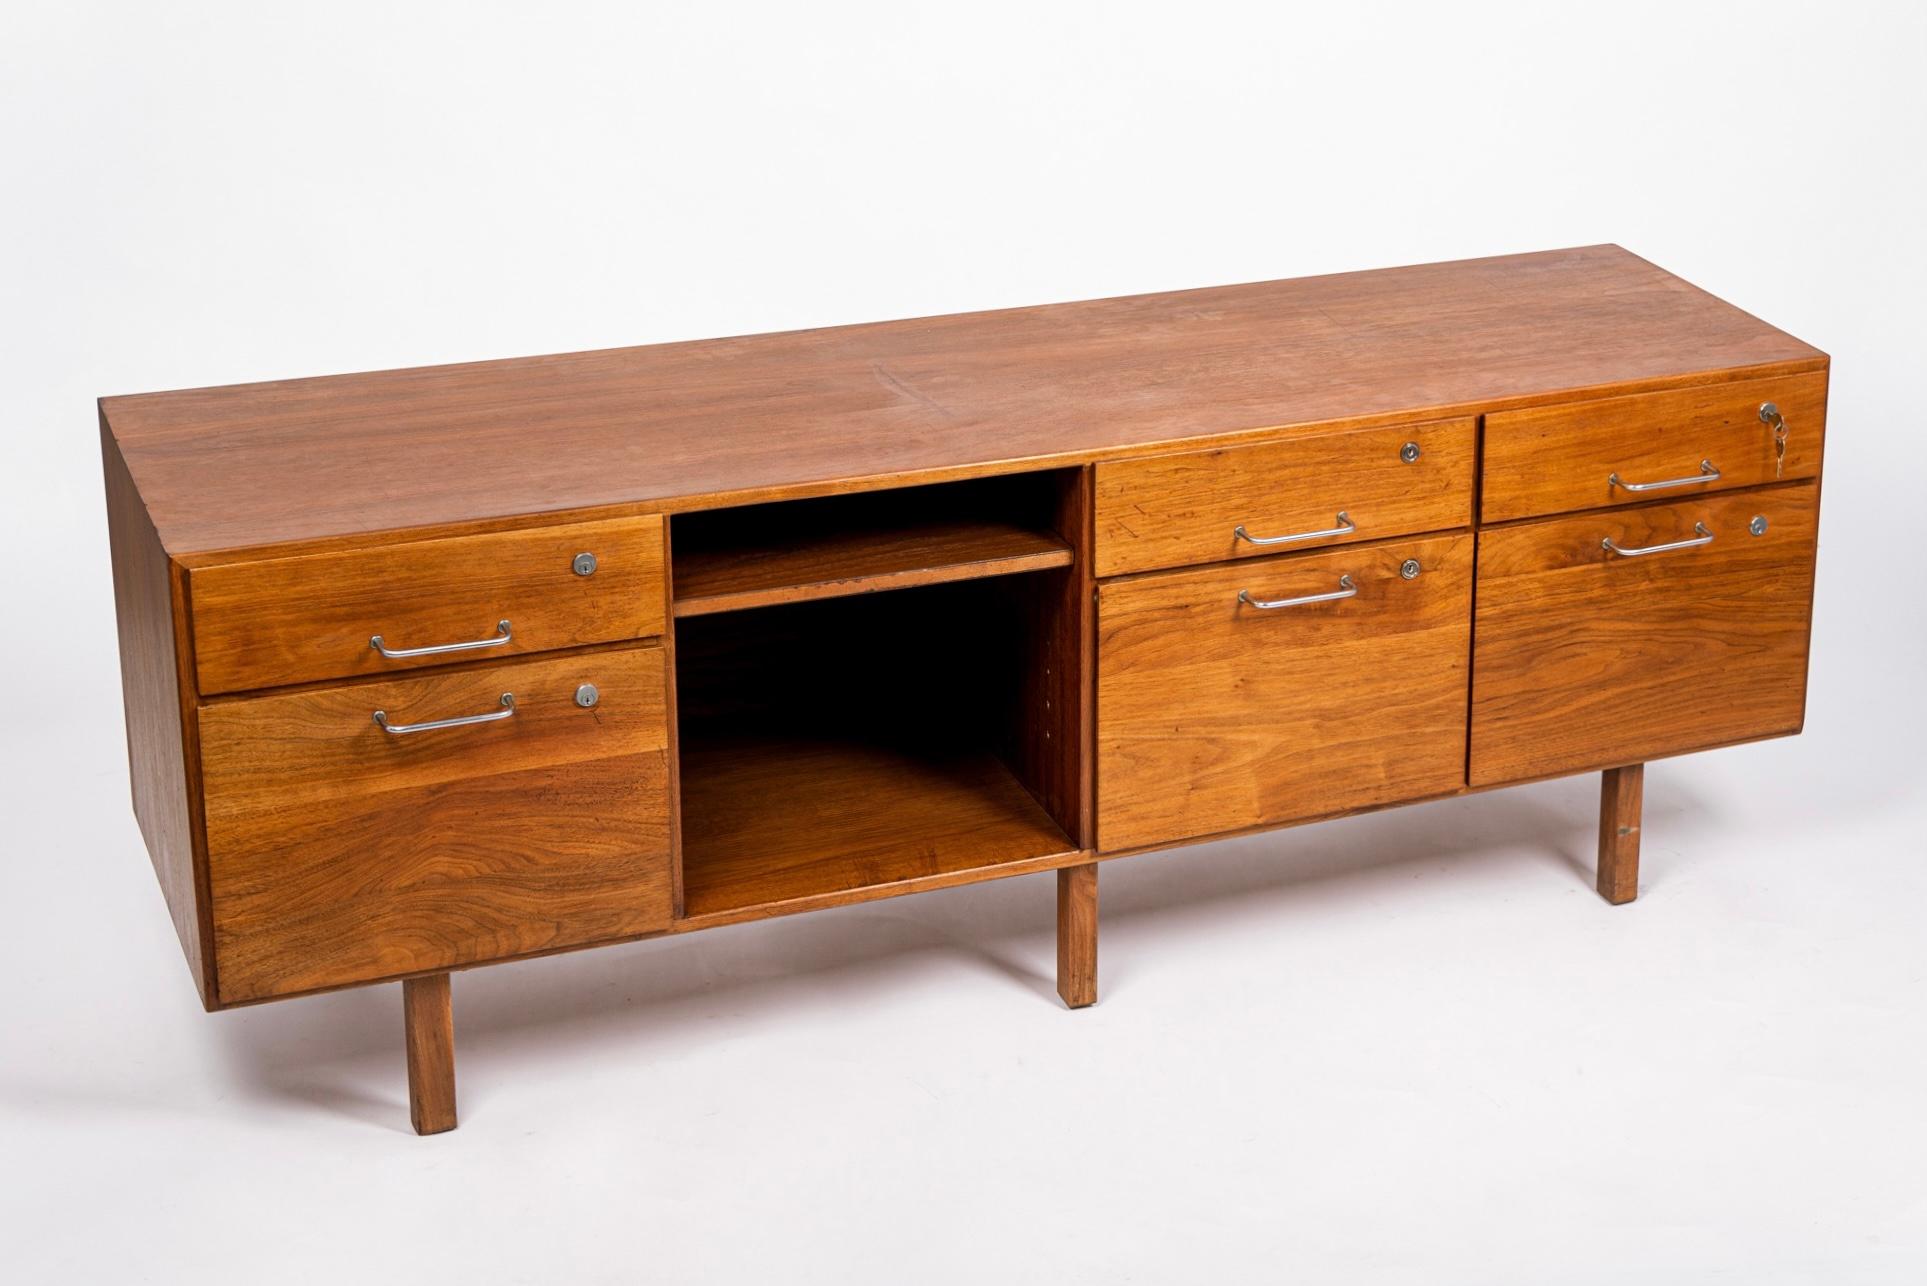 This vintage mid century file cabinet credenza from the Group 8 Collection by Jens Risom circa 1960 has classic Danish modern styling with clean, minimalist, geometric lines. The Group 8 series was made-to-order and highly customizable. This walnut